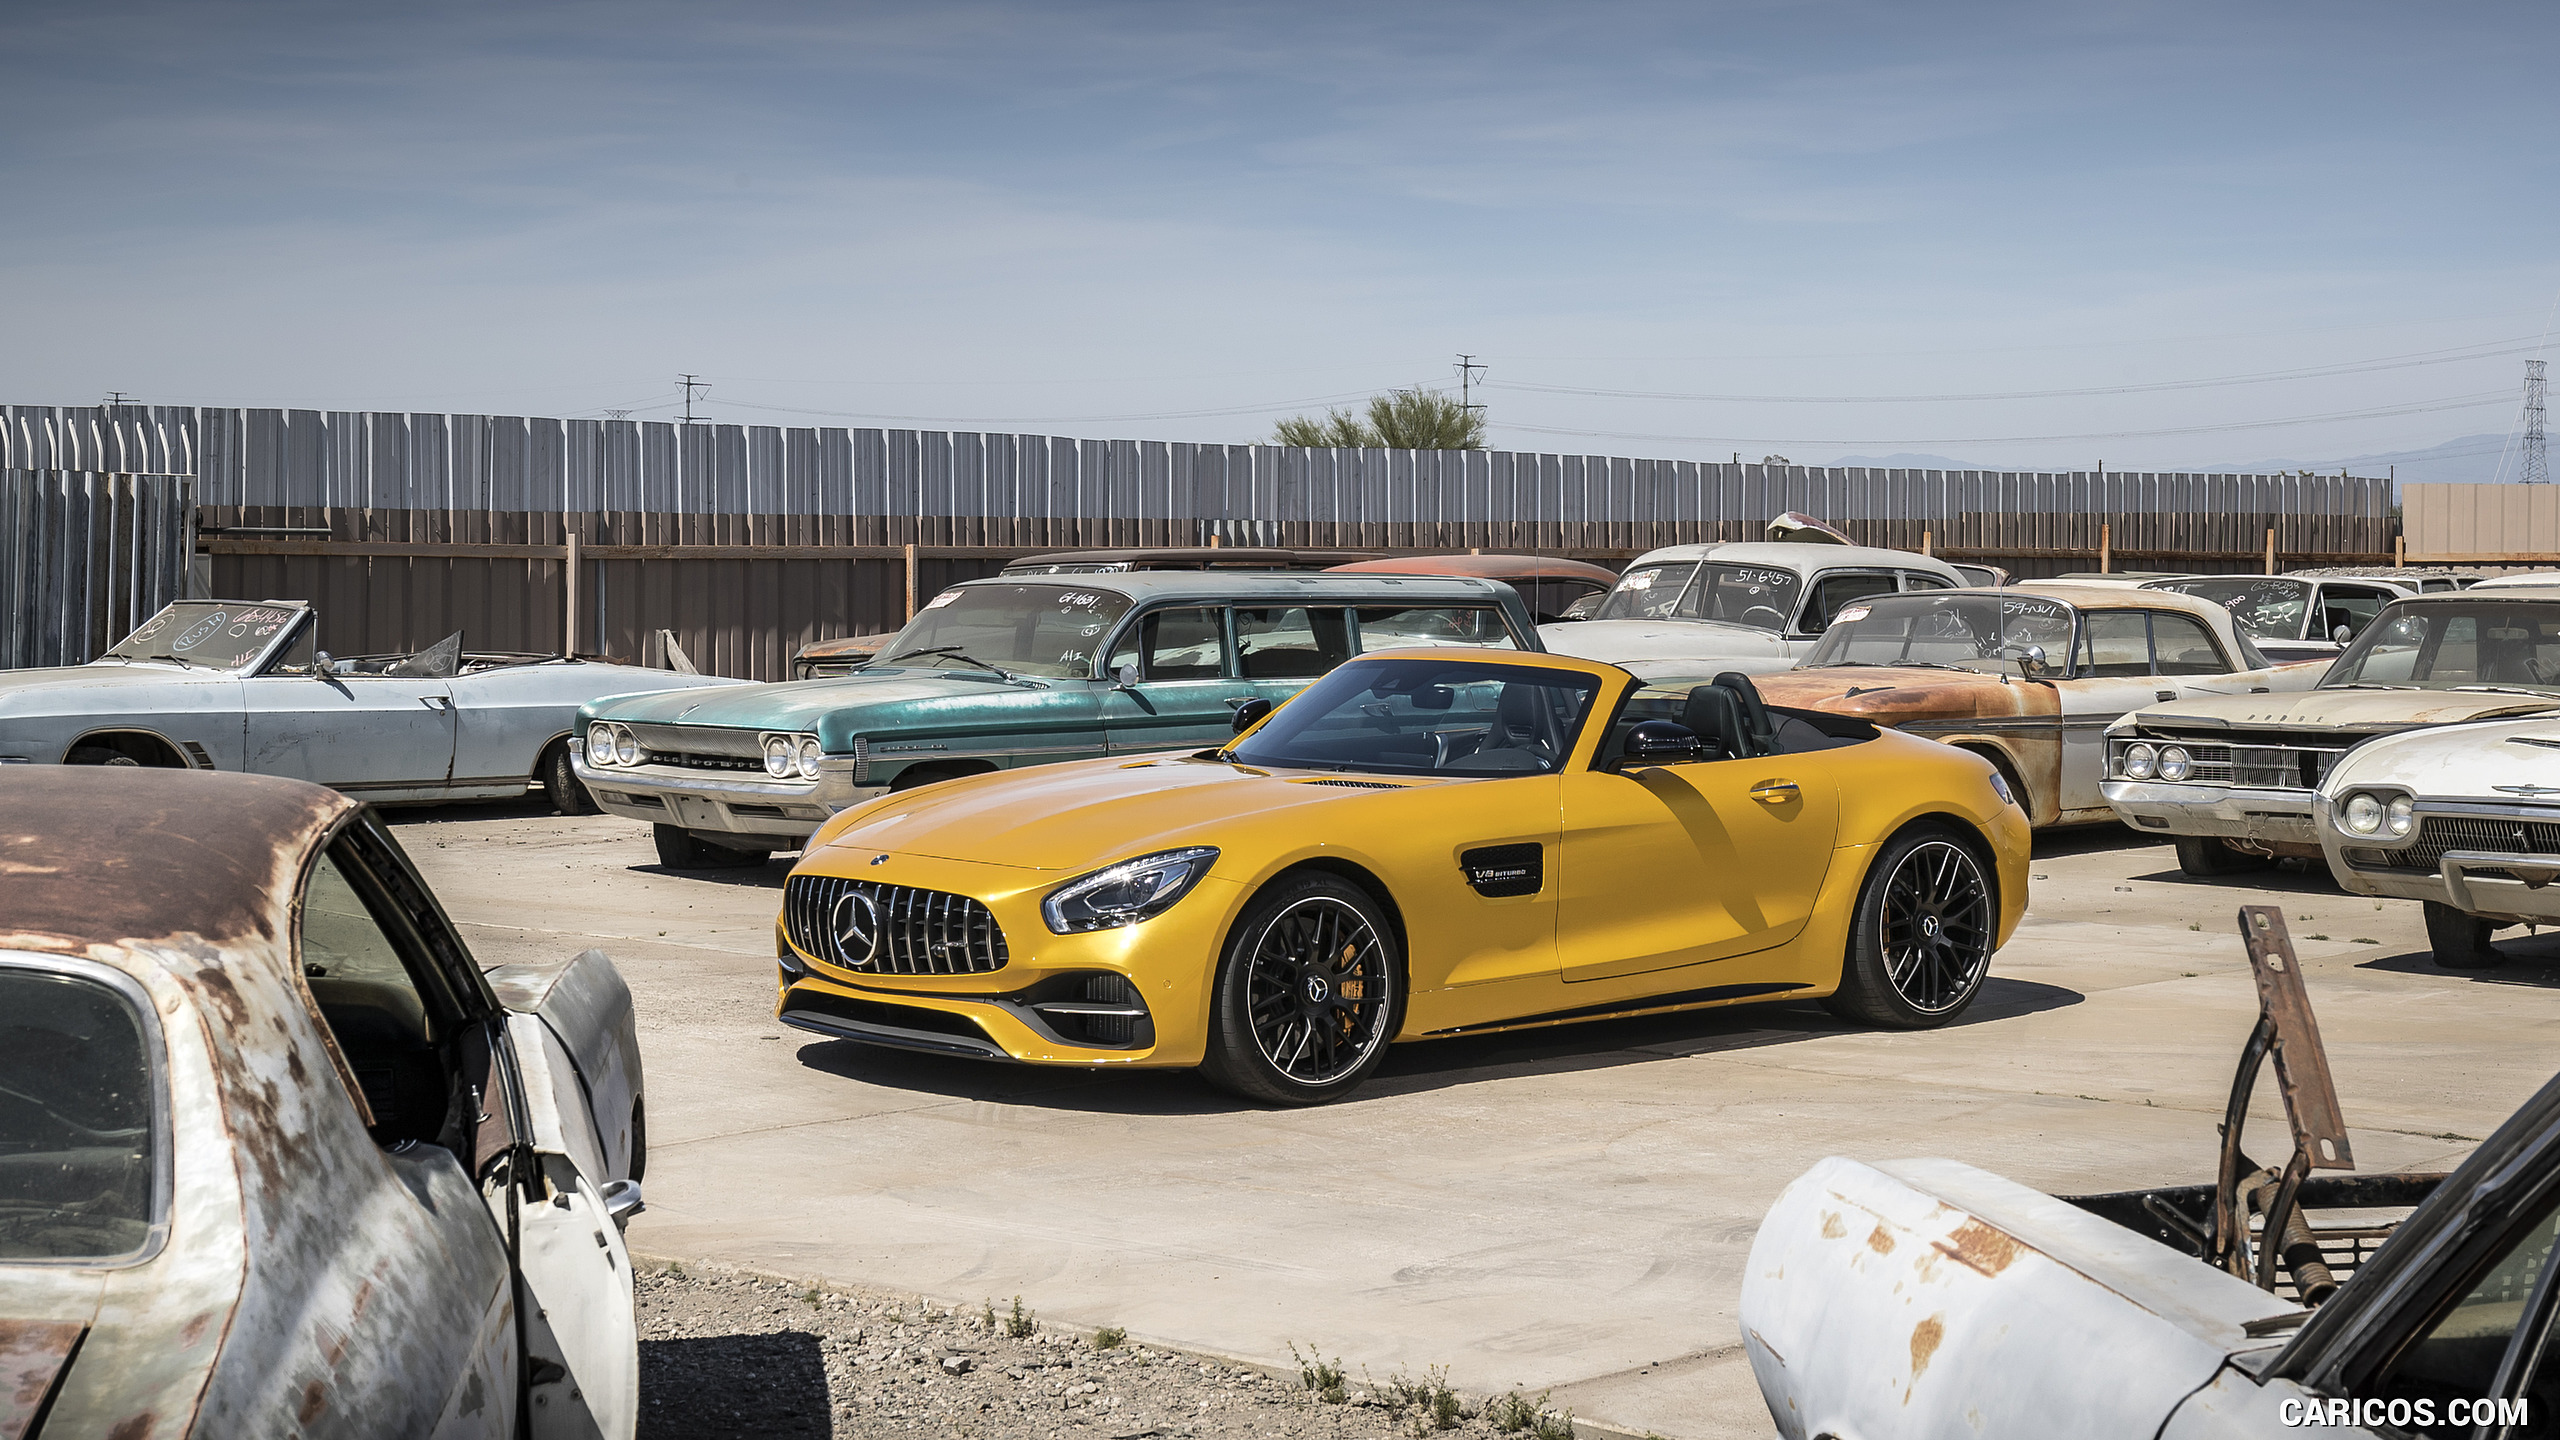 2018 Mercedes-AMG GT C Roadster - Front Three-Quarter, #208 of 350